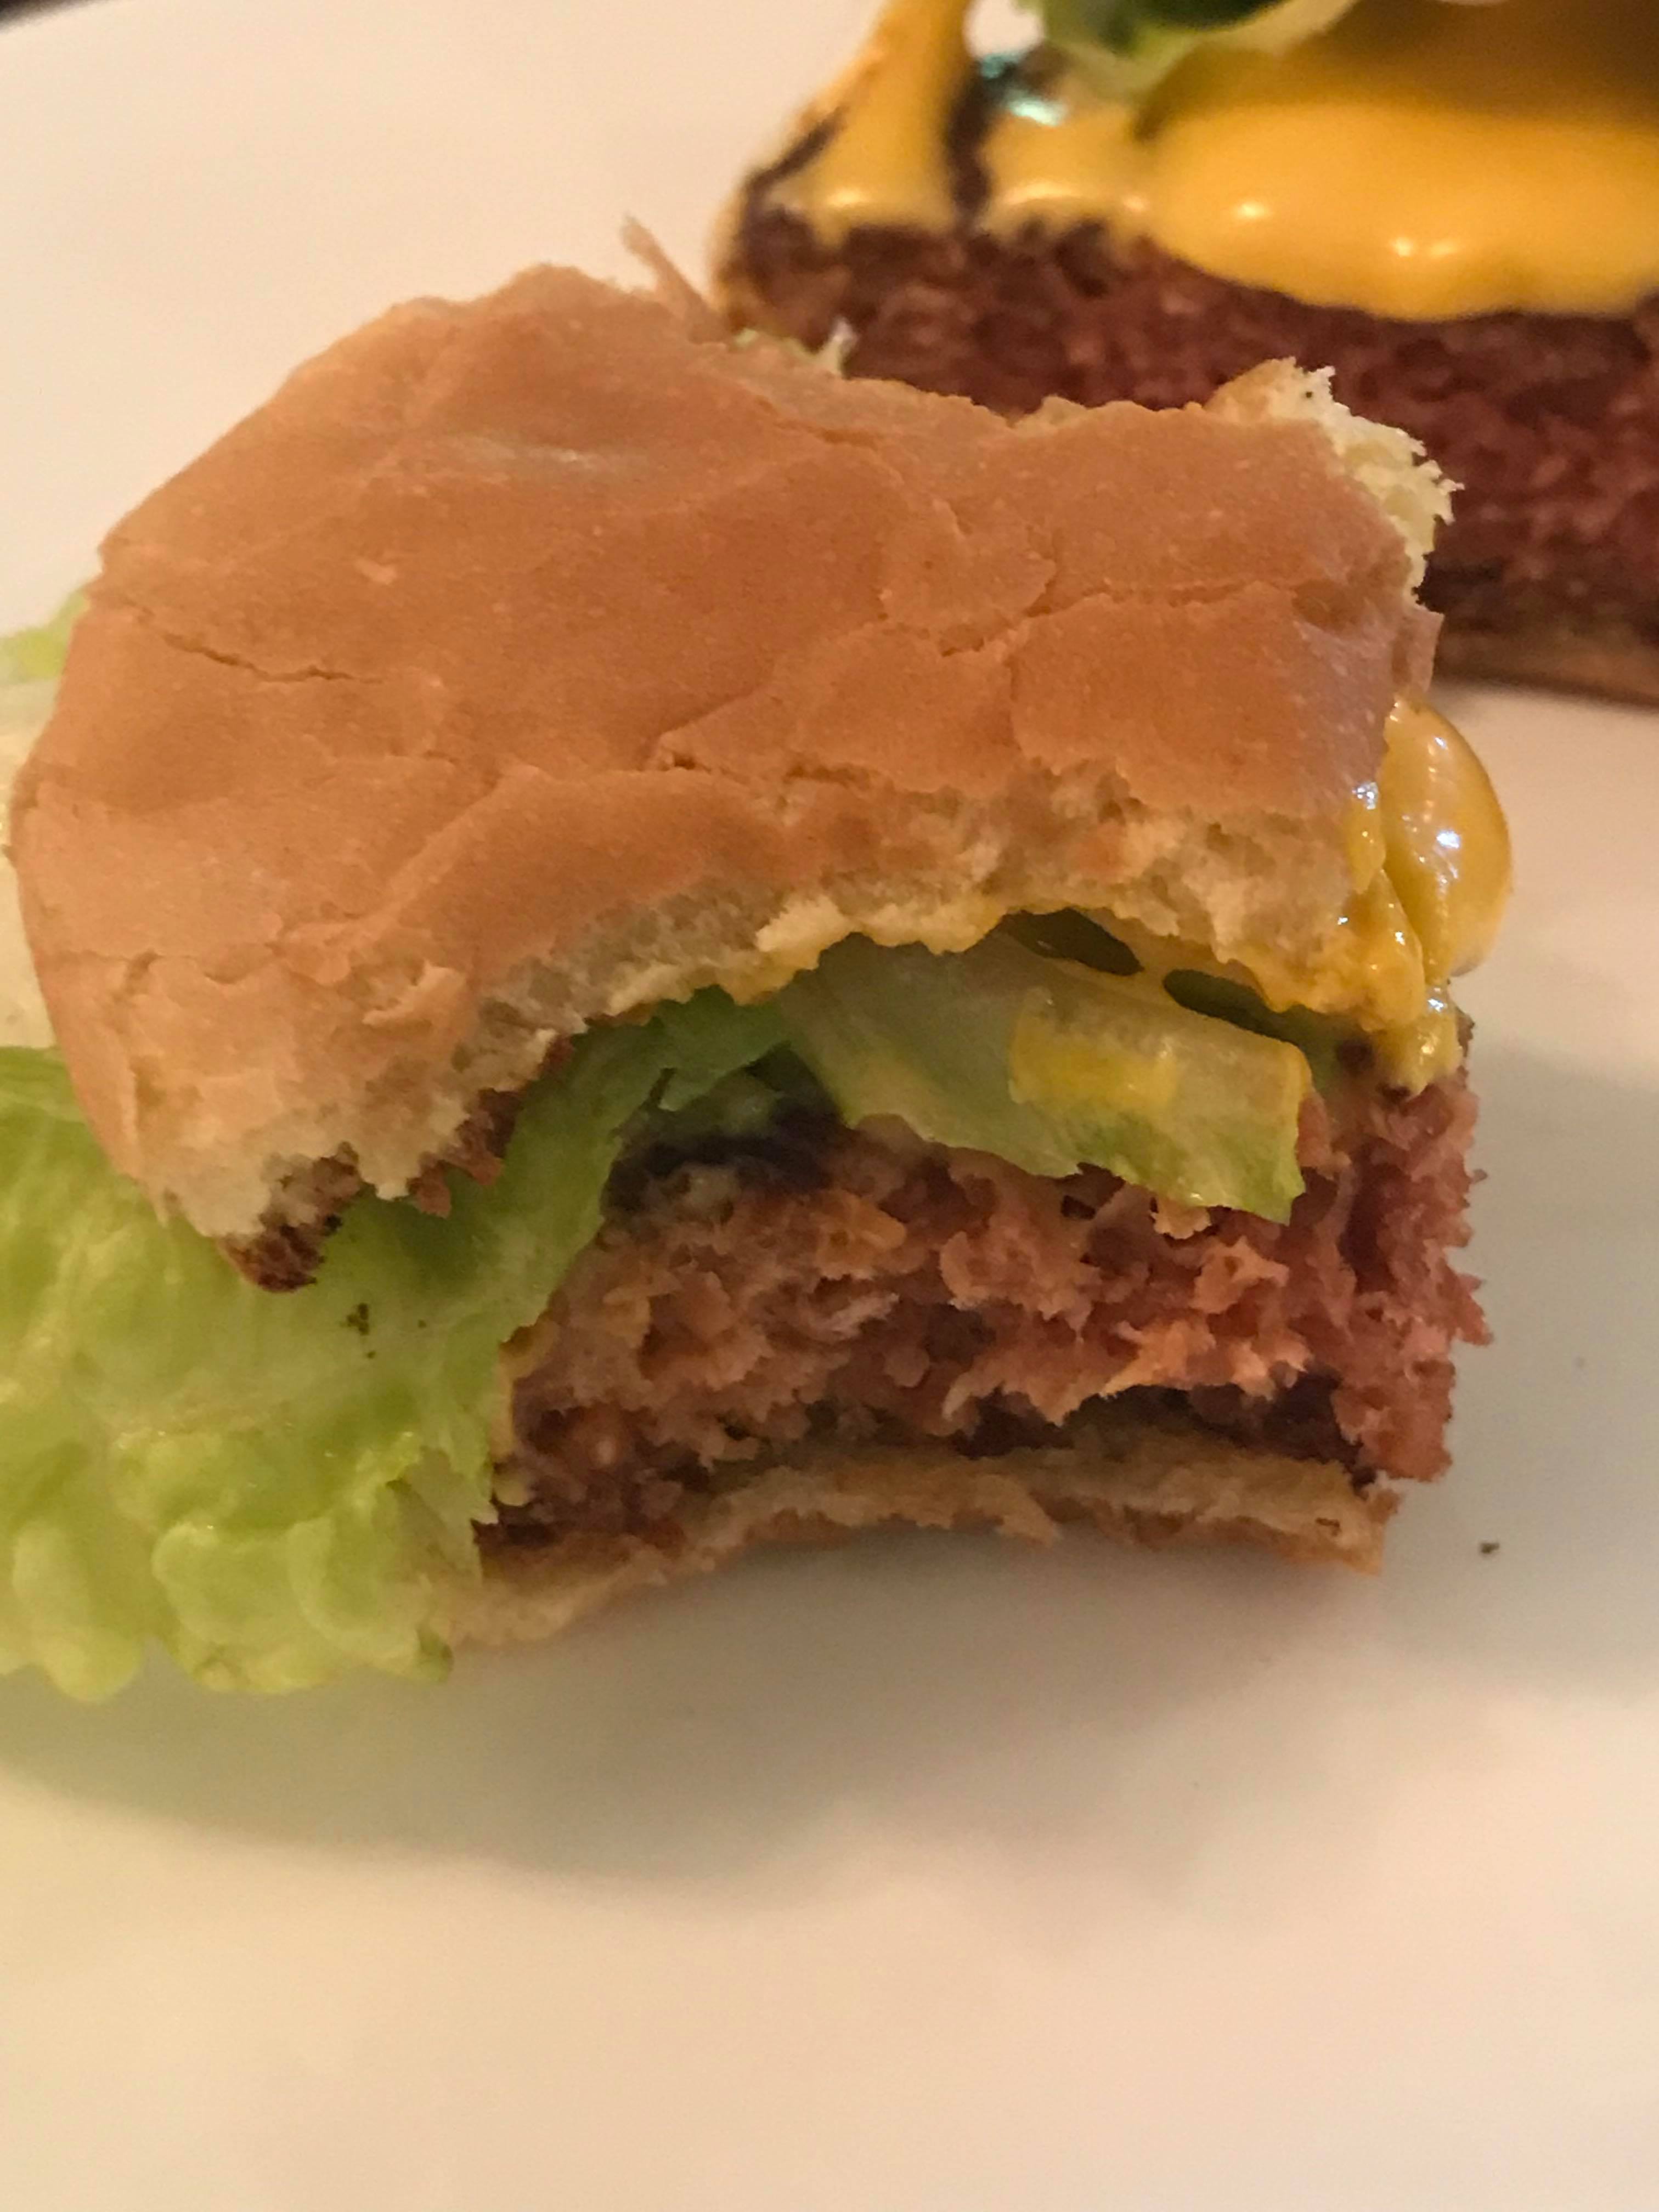 Impossible Burger Review